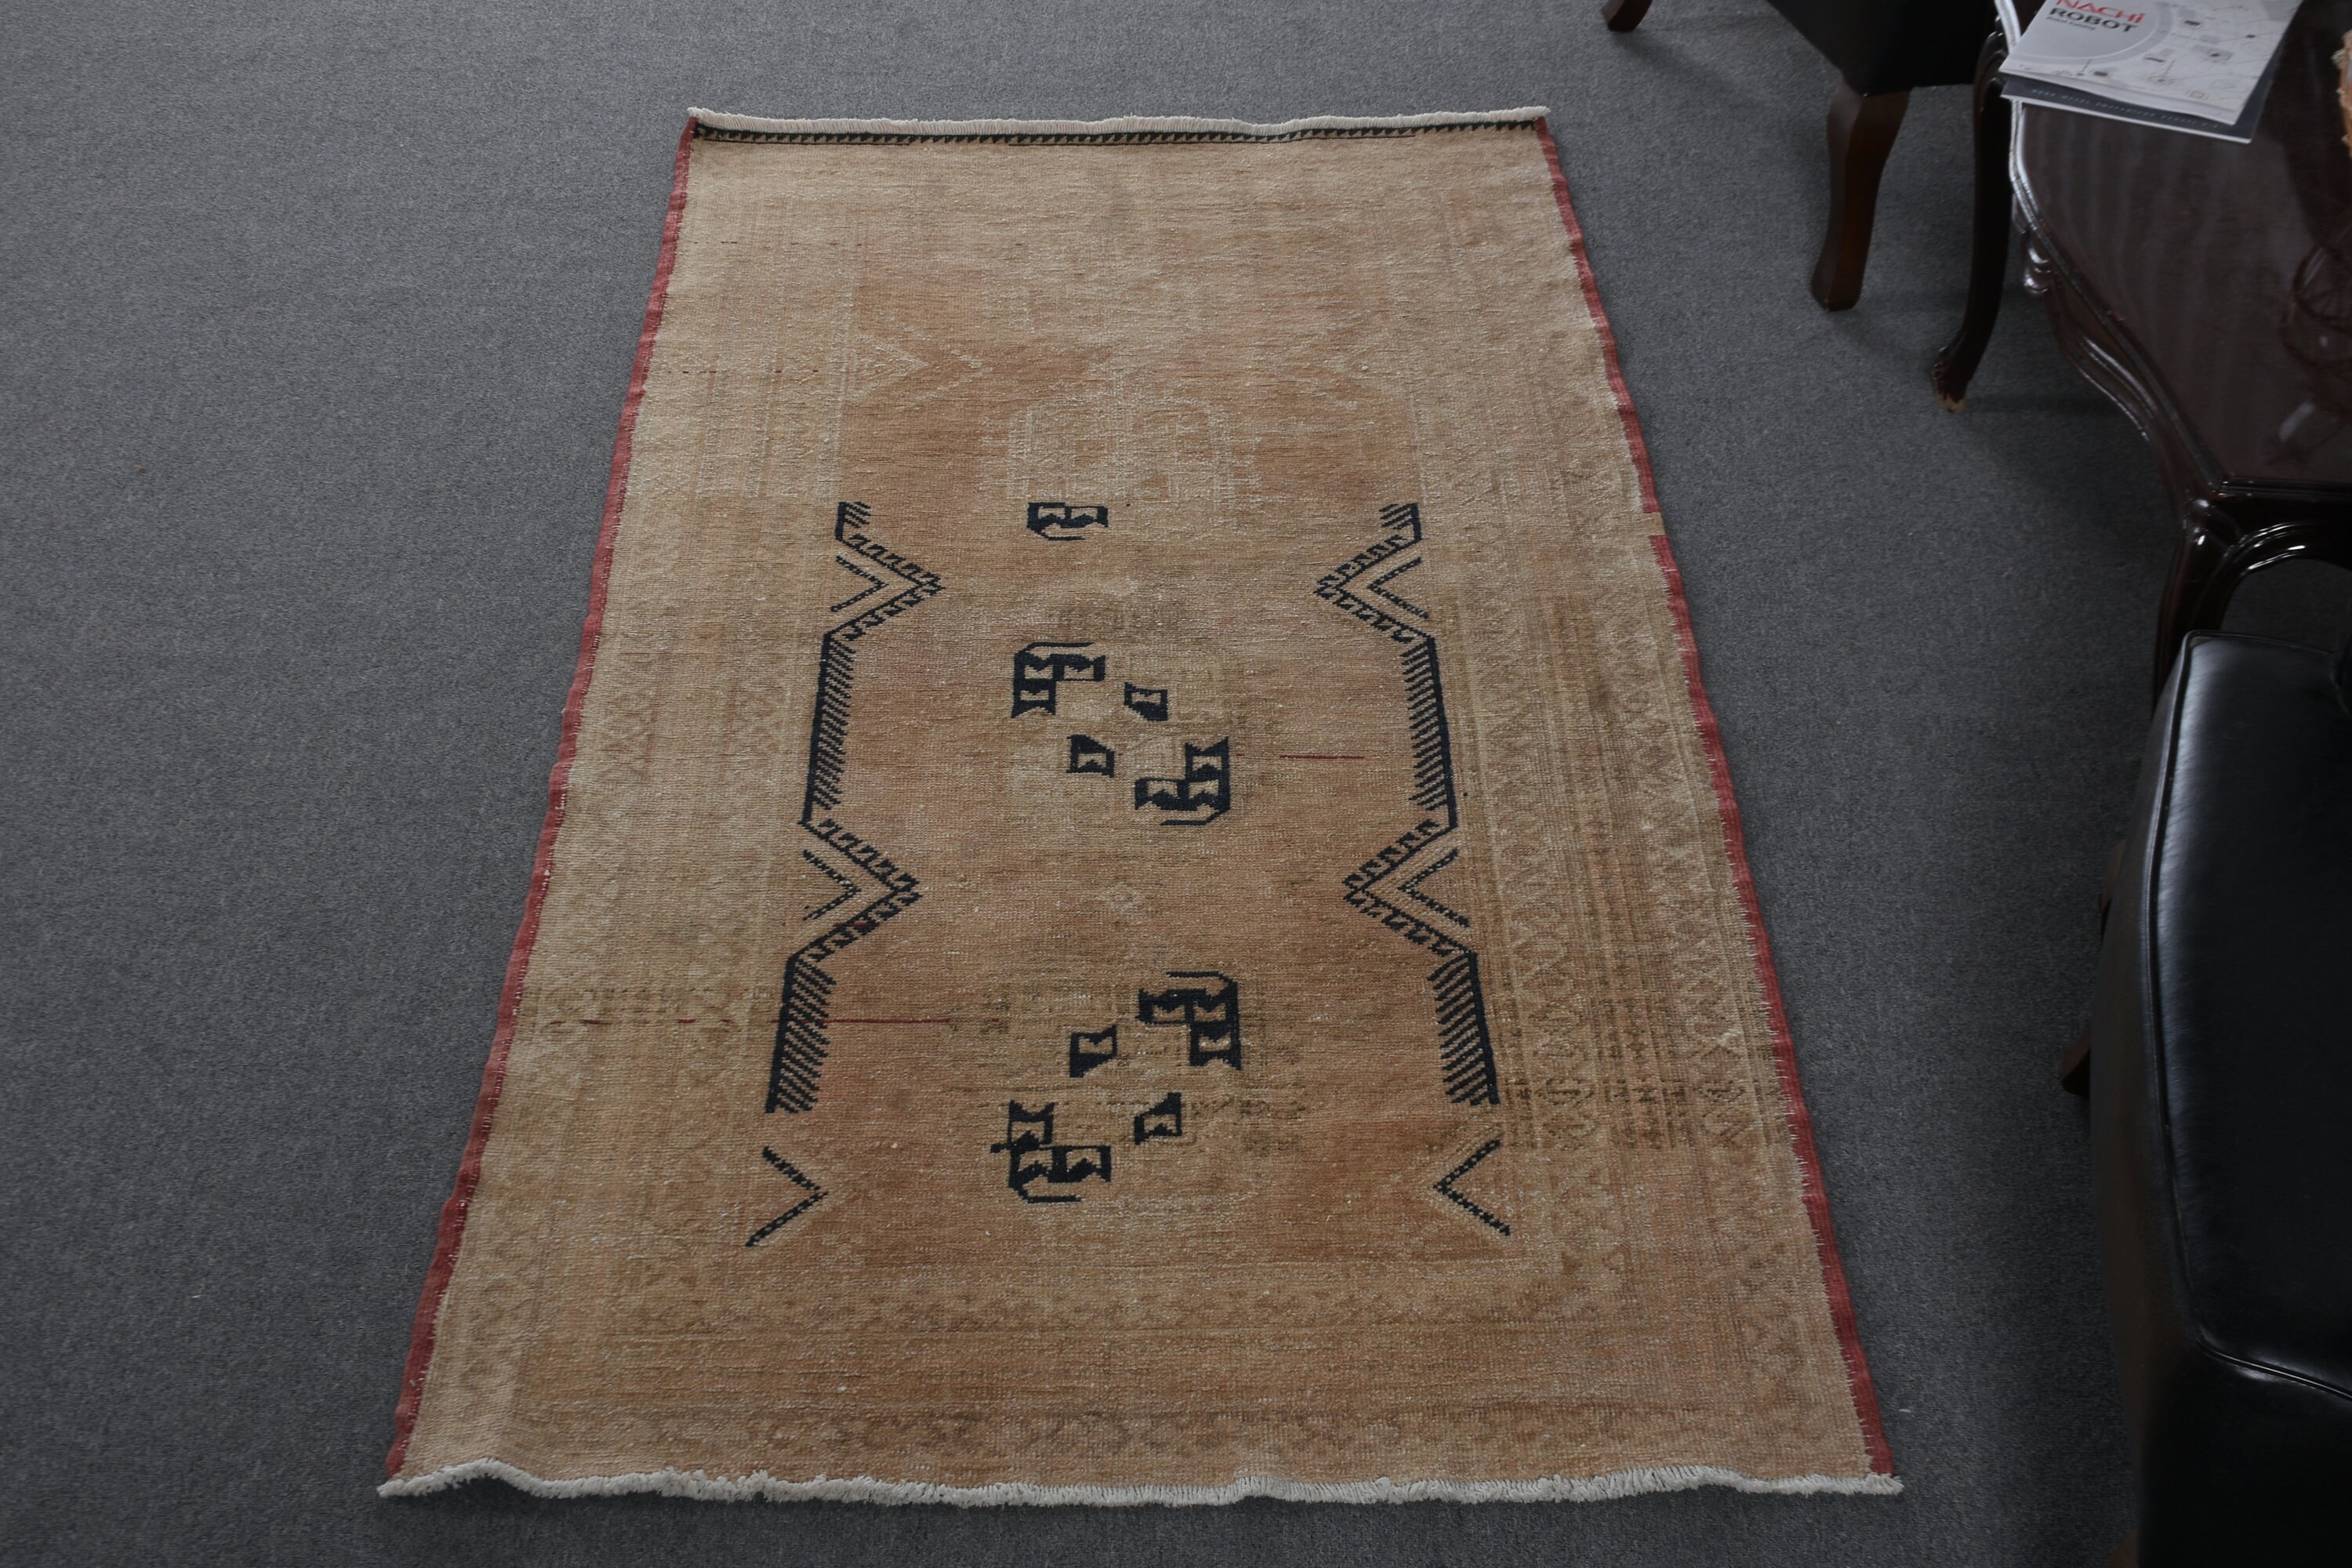 Antique Rugs, Vintage Rugs, Bedroom Rug, Rugs for Kitchen, Abstract Rug, Entry Rug, Turkish Rug, 3.3x6.5 ft Accent Rug, Brown Kitchen Rug